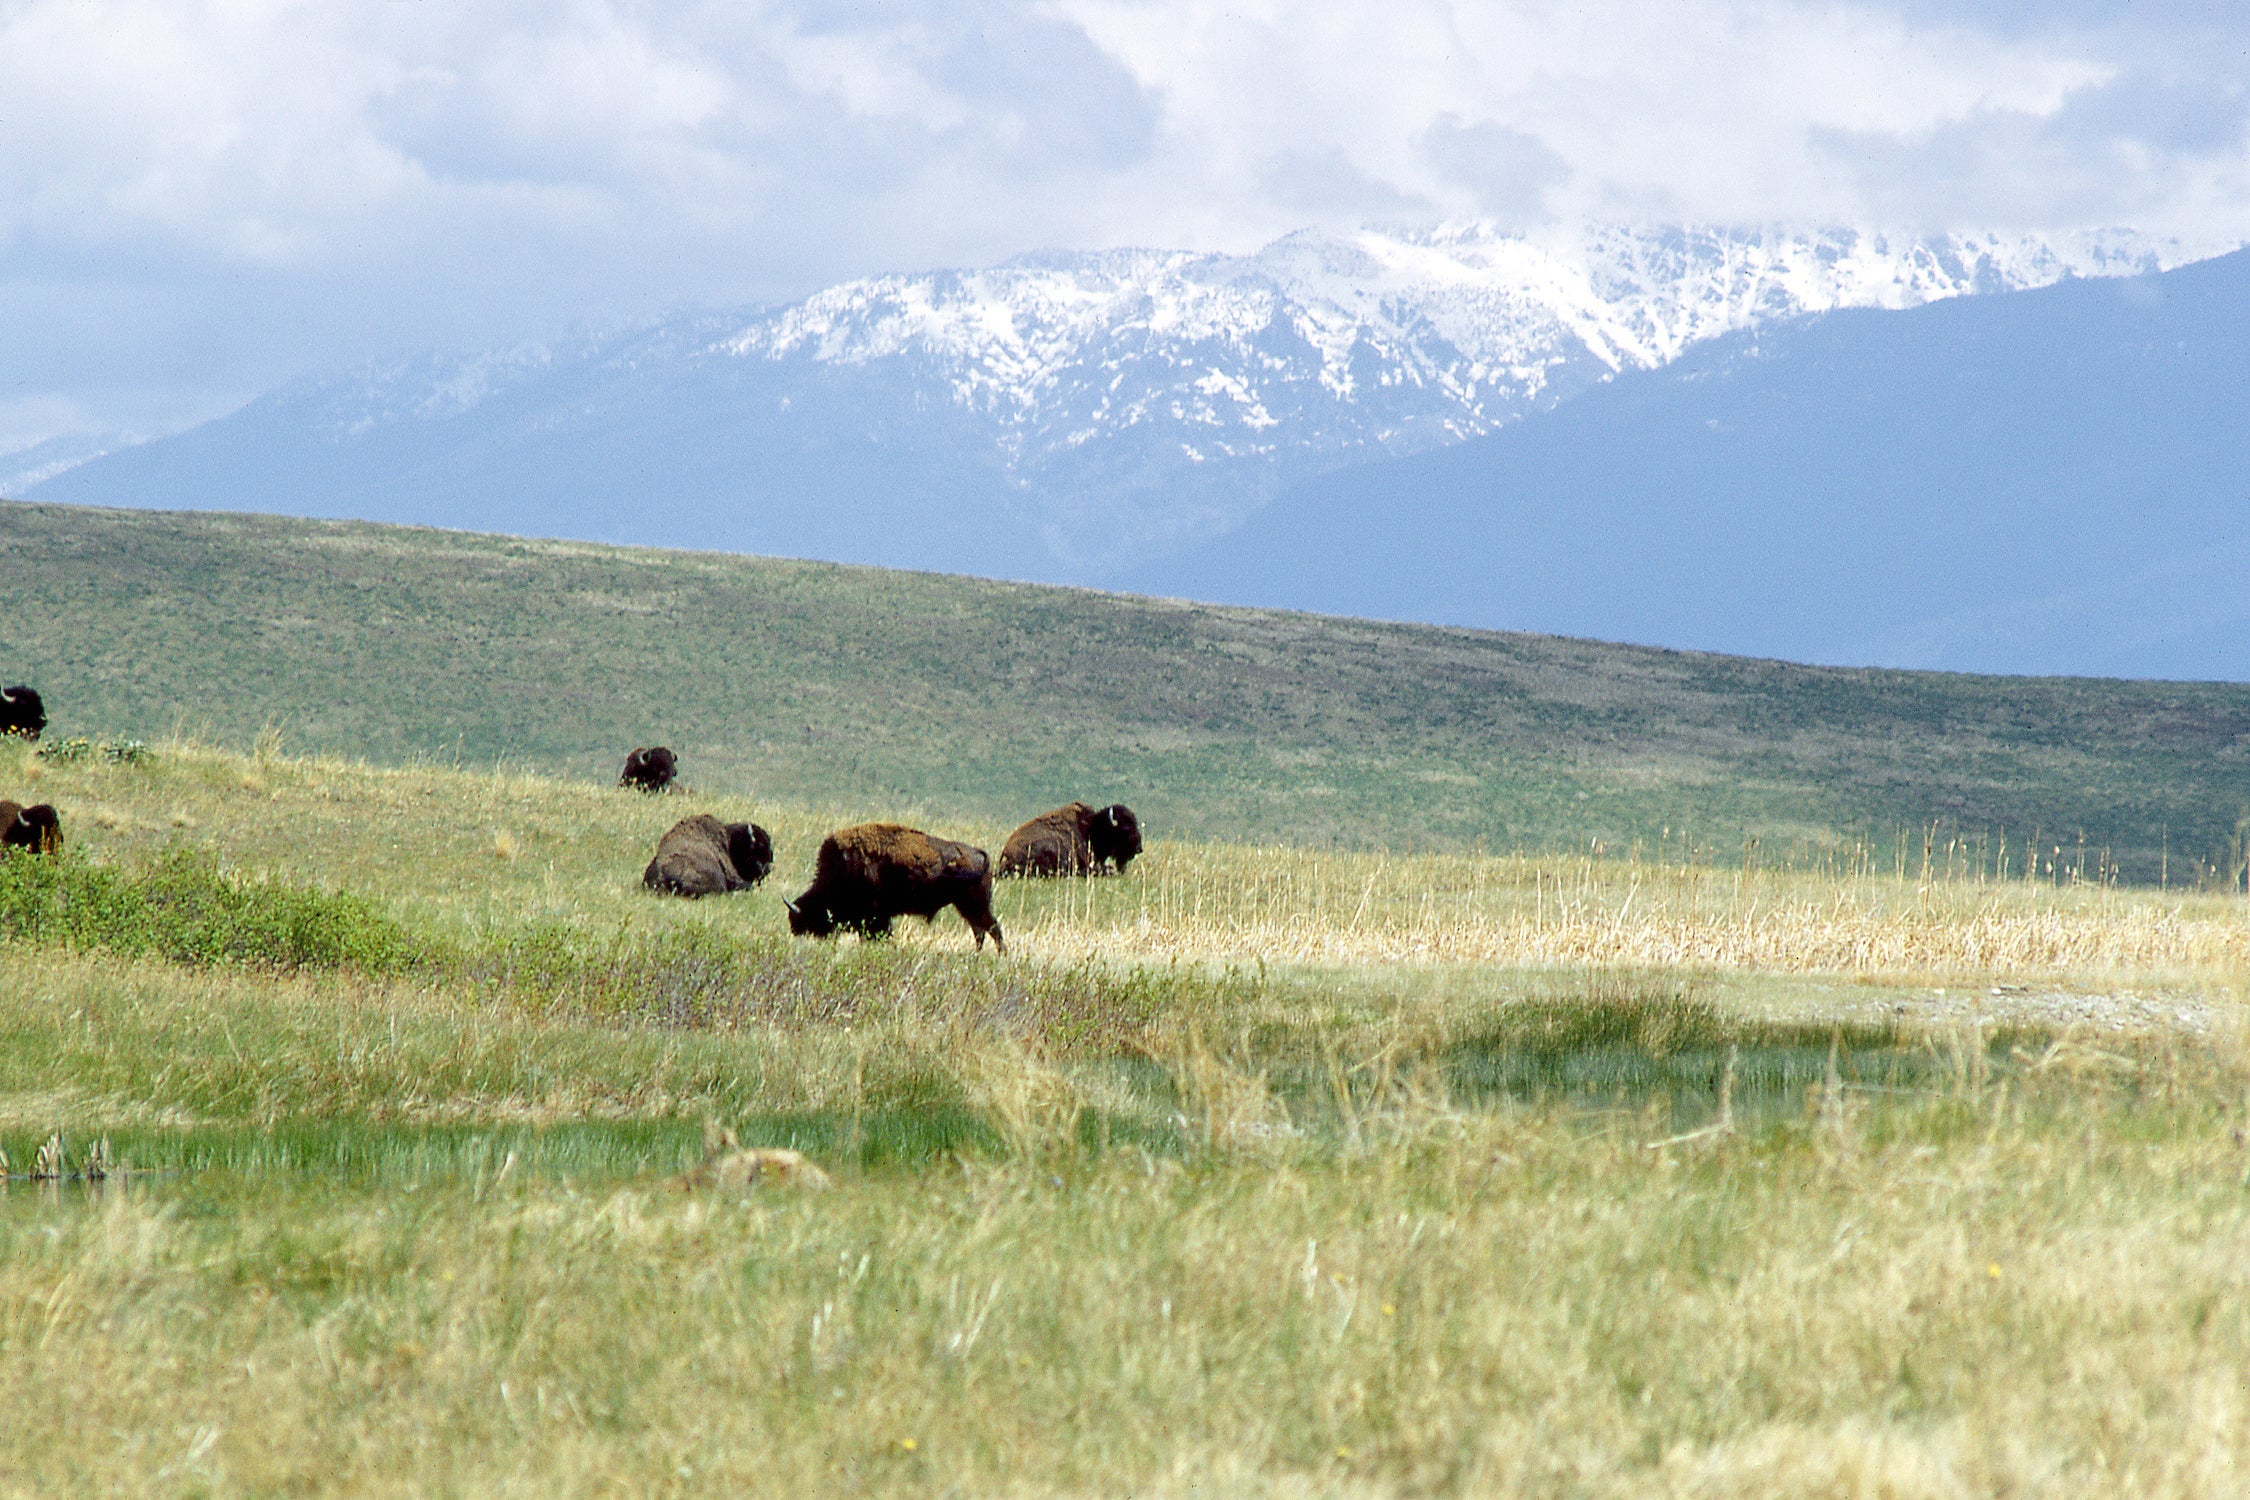 Bison graze on grasslands with snow-topped mountains in the background.